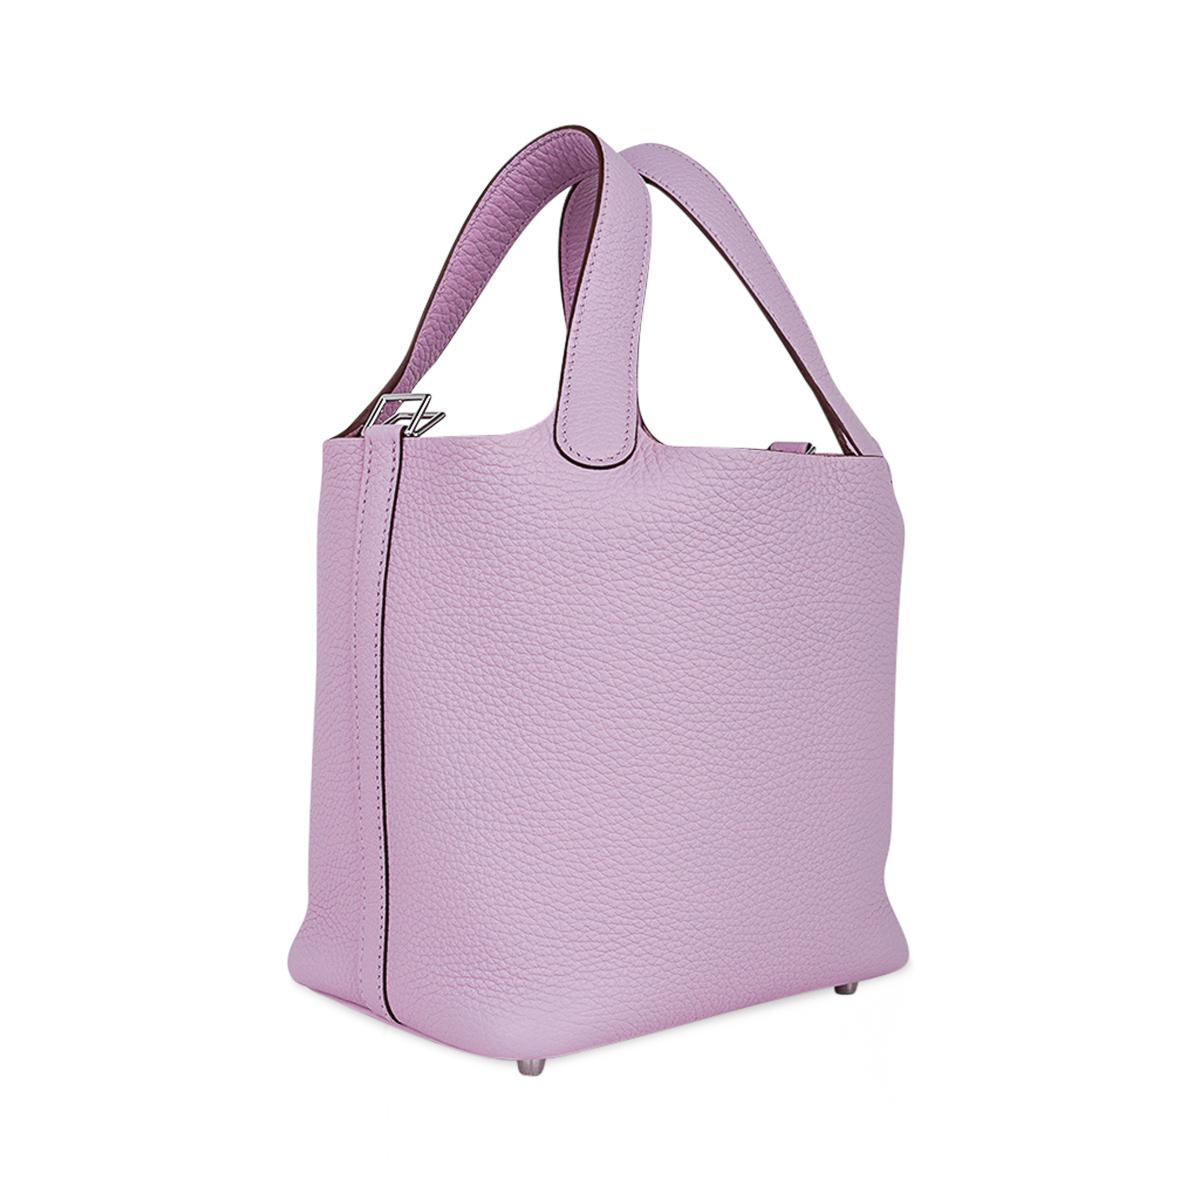 Mightychic offers an Hermes Picotin Lock 18 tote bag featured in coveted Mauve Sylvestre.
Beautiful soft neutral colour.
This charming Hermes Picotin tote is a perfect everyday go to bag.
Clemence leather with Palladium hardware.
Comes with lock and